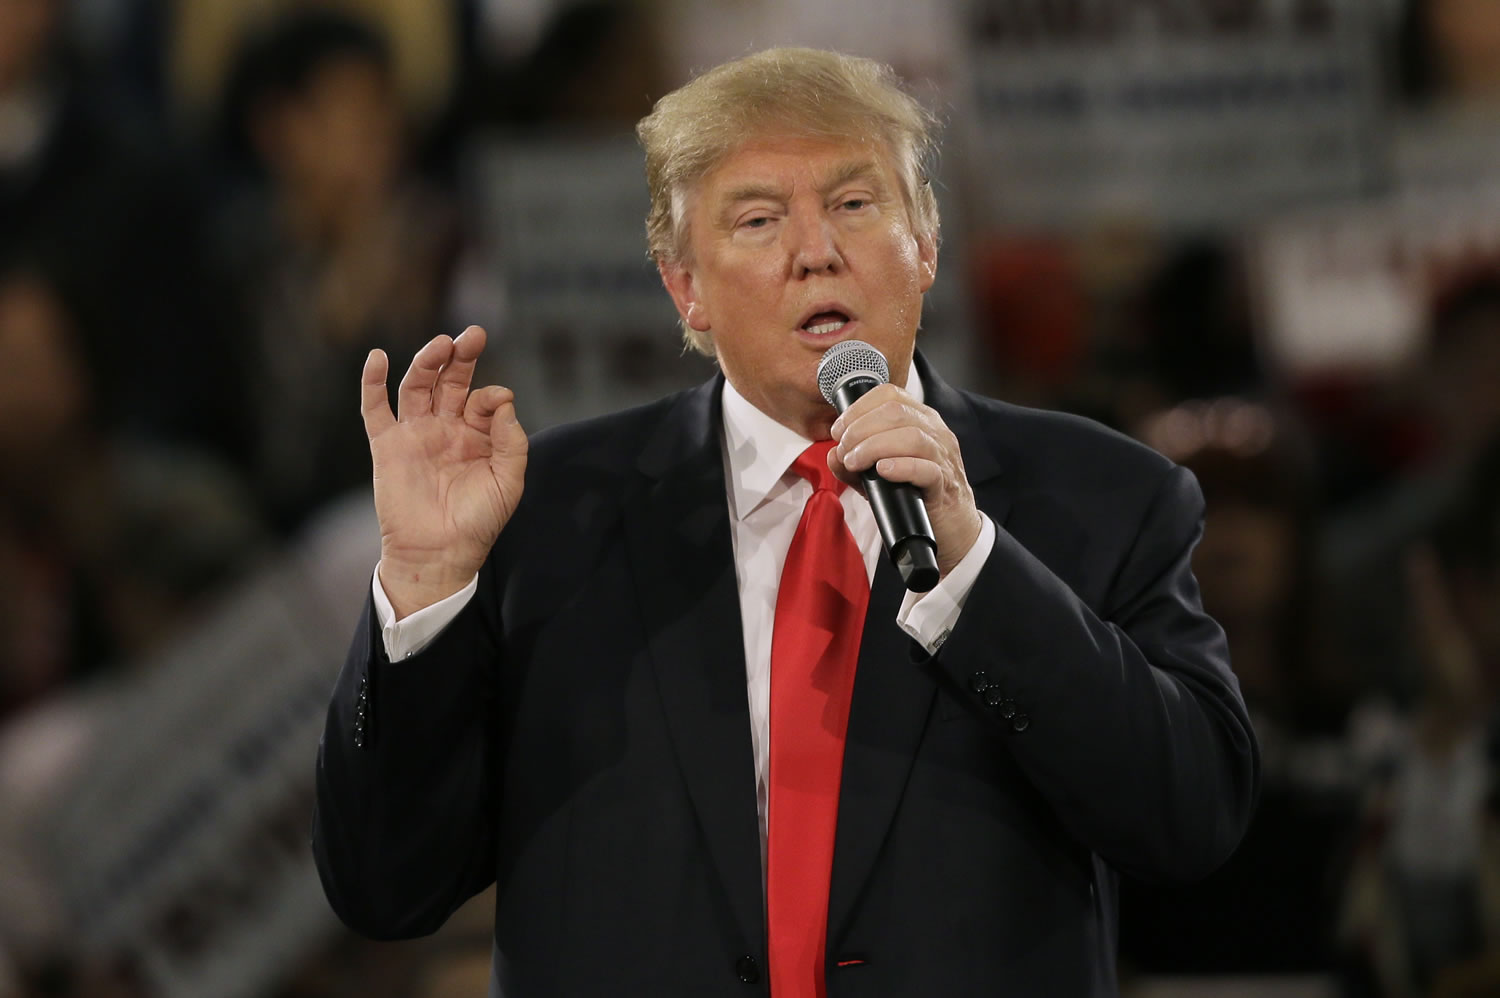 In this Dec. 11, 2015, photo, Republican presidential candidate Donald Trump speaks during a campaign rally in Des Moines, Iowa. Theres no legal or historical precedent for closing U.S. borders to the worlds 1.6 billion Muslims, but neither is there any Supreme Court case that clearly prevents a president or Congress from doing so. Legal experts are divided over how the high court would react to Trumps call for a temporary halt to Muslims entering the United States.